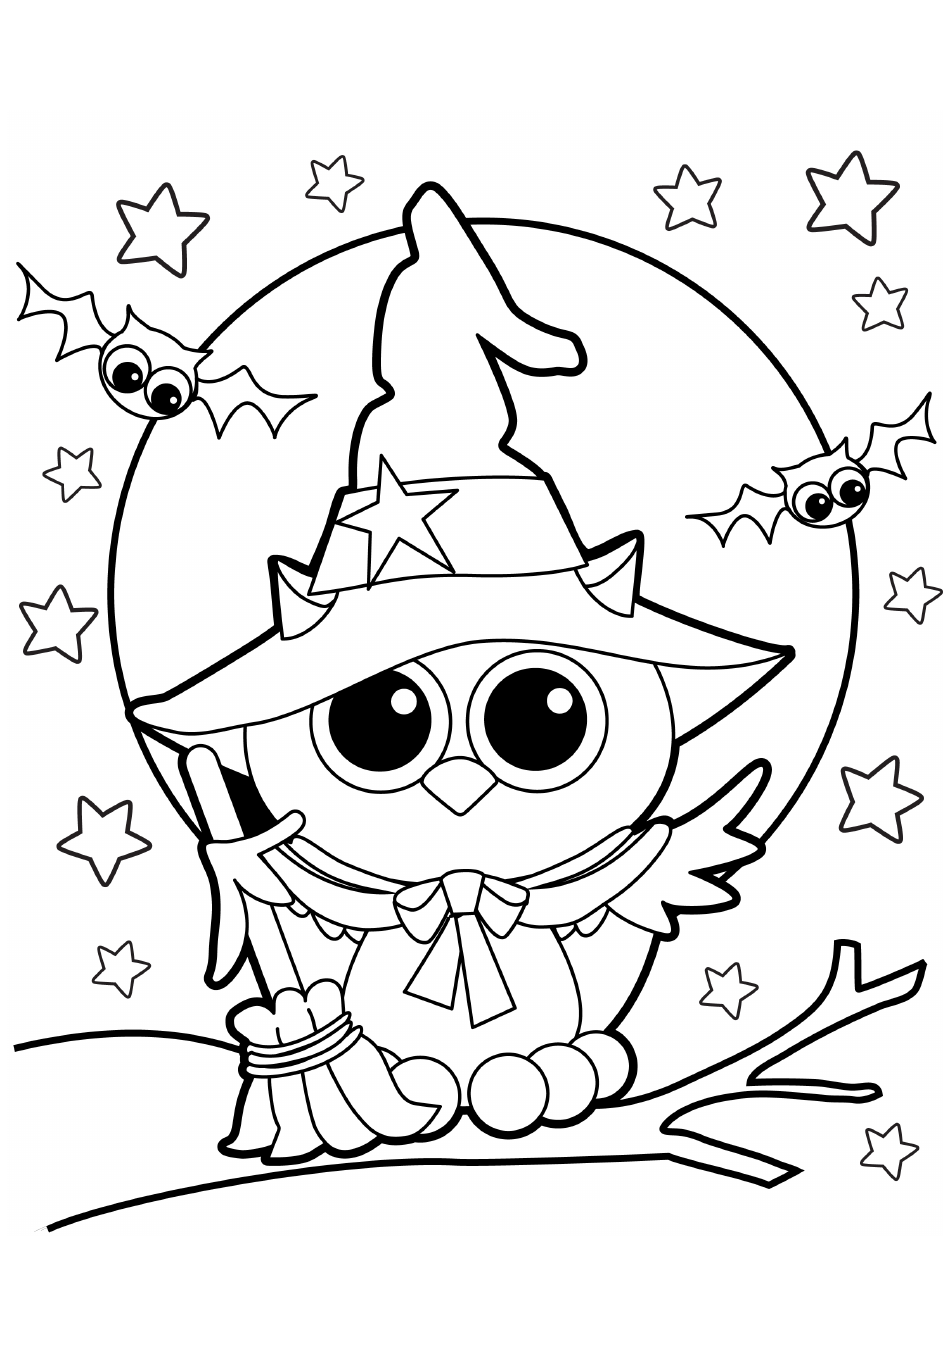 Halloween Coloring Sheet - Owl, Page 1